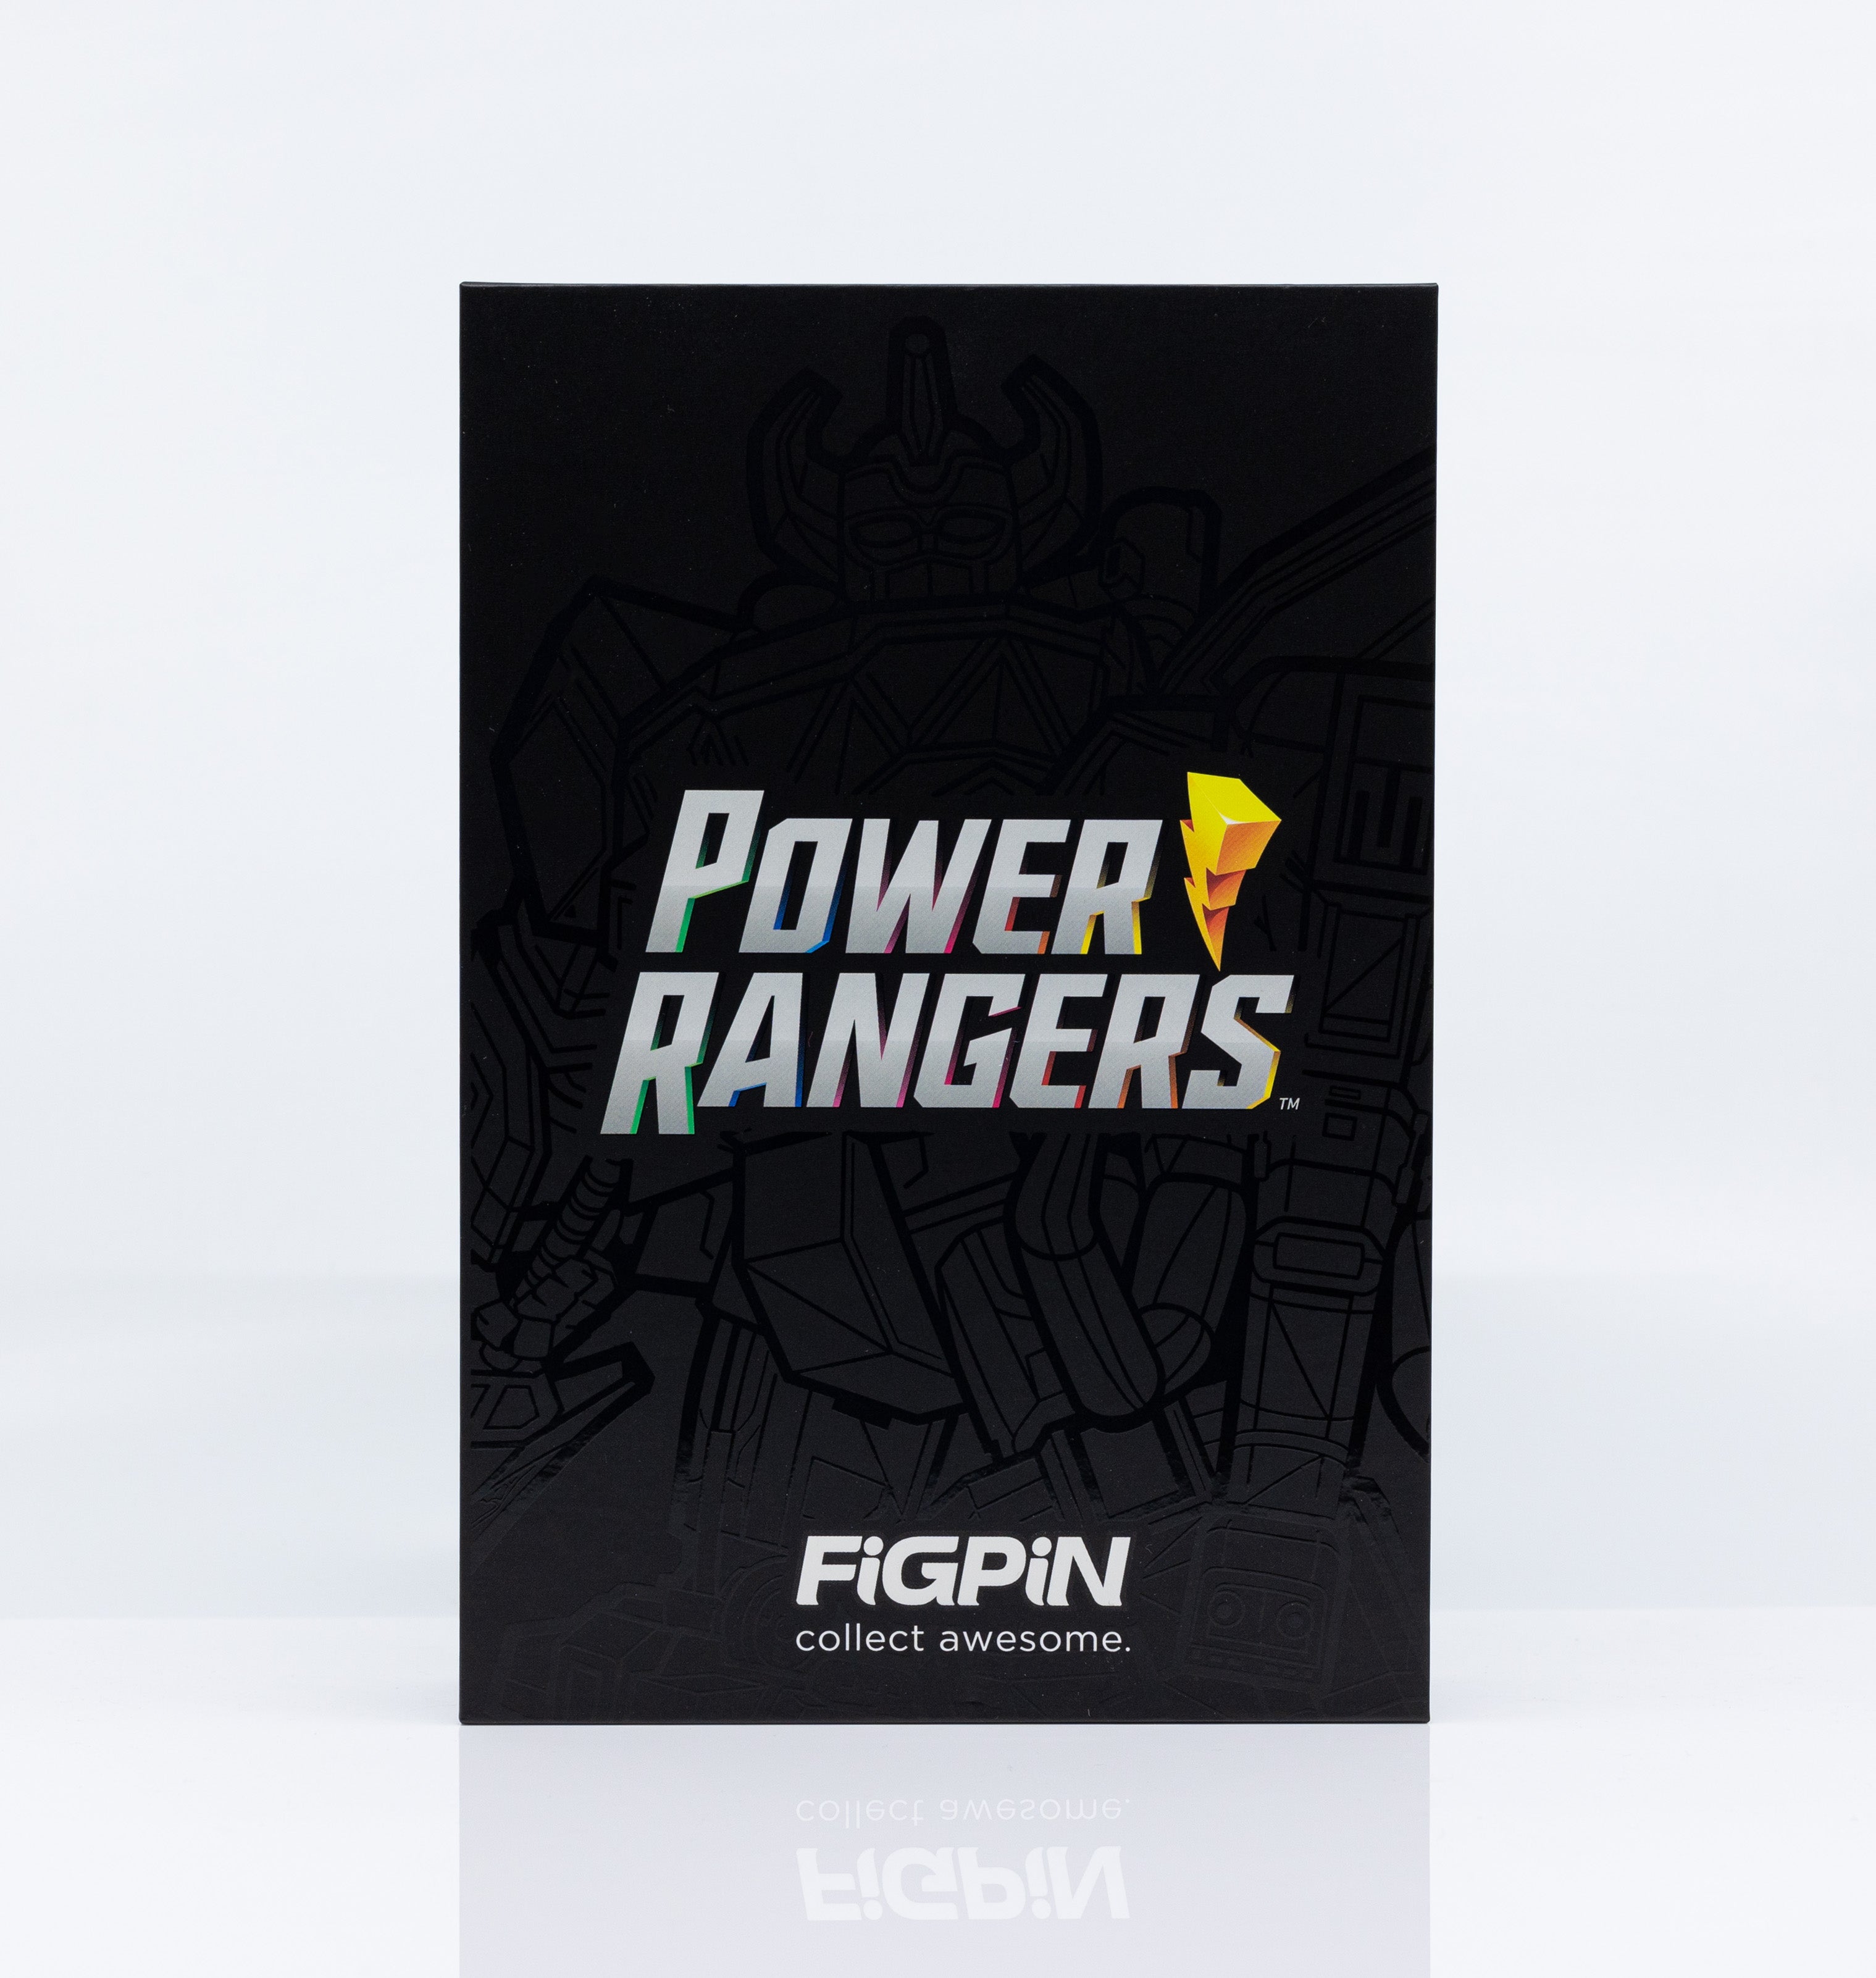 Power Rangers Megazord FiGPiN XL front of box design featuring lineart of Megazord, Power Rangers logo, and FiGPiN: Collect Awesome Logo